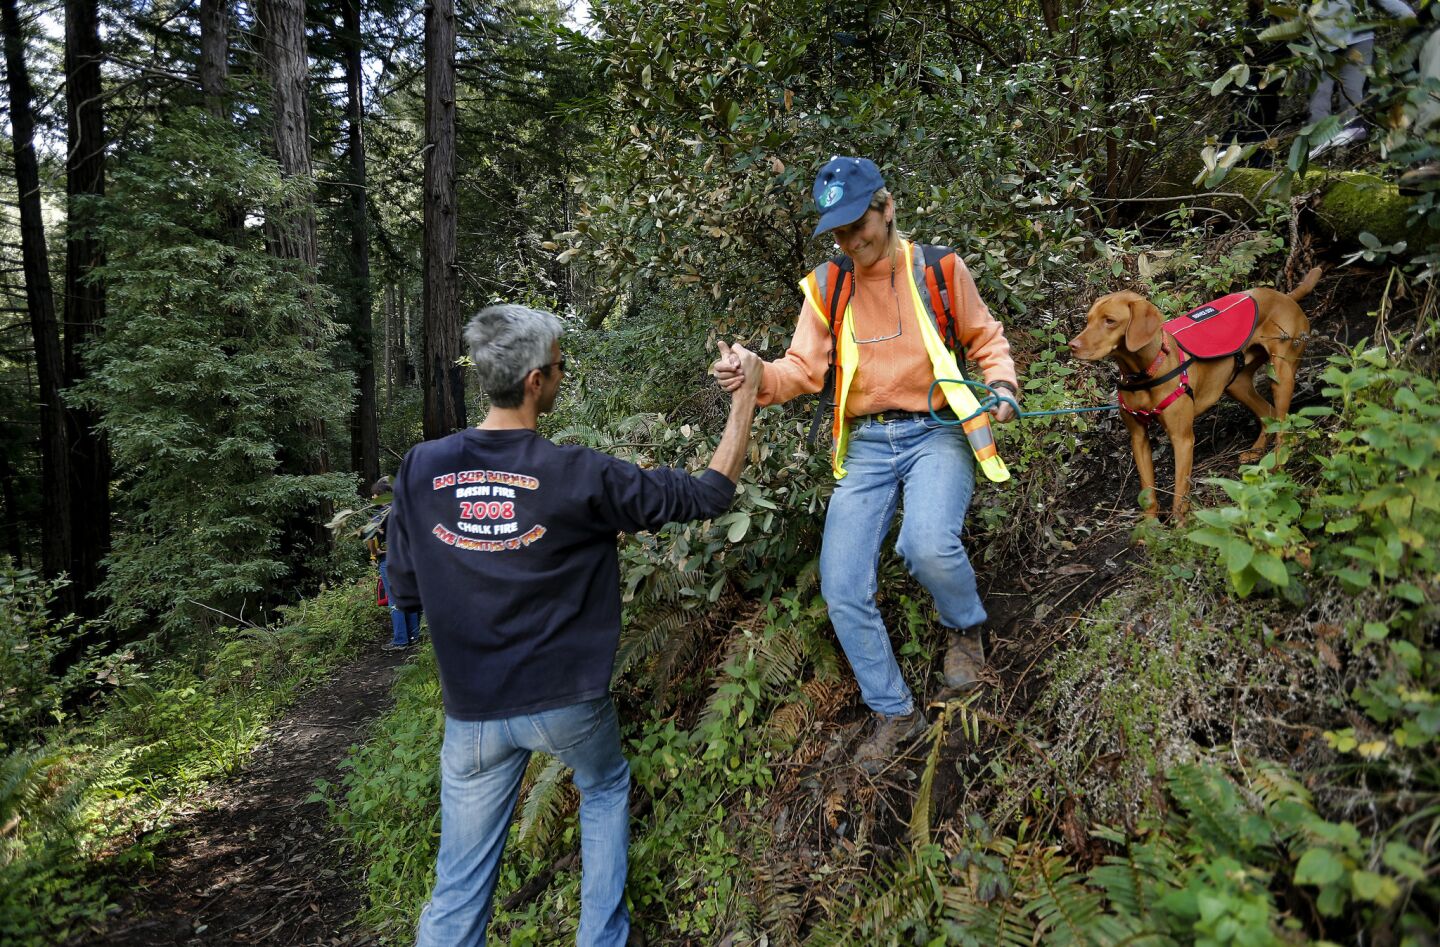 Big Sur resident Carl Swanson, left, gives a helping hand to Carissa Chappellet while navigating a trail inside Pfeiffer Big Sur State Park in order to get to their stranded cars.